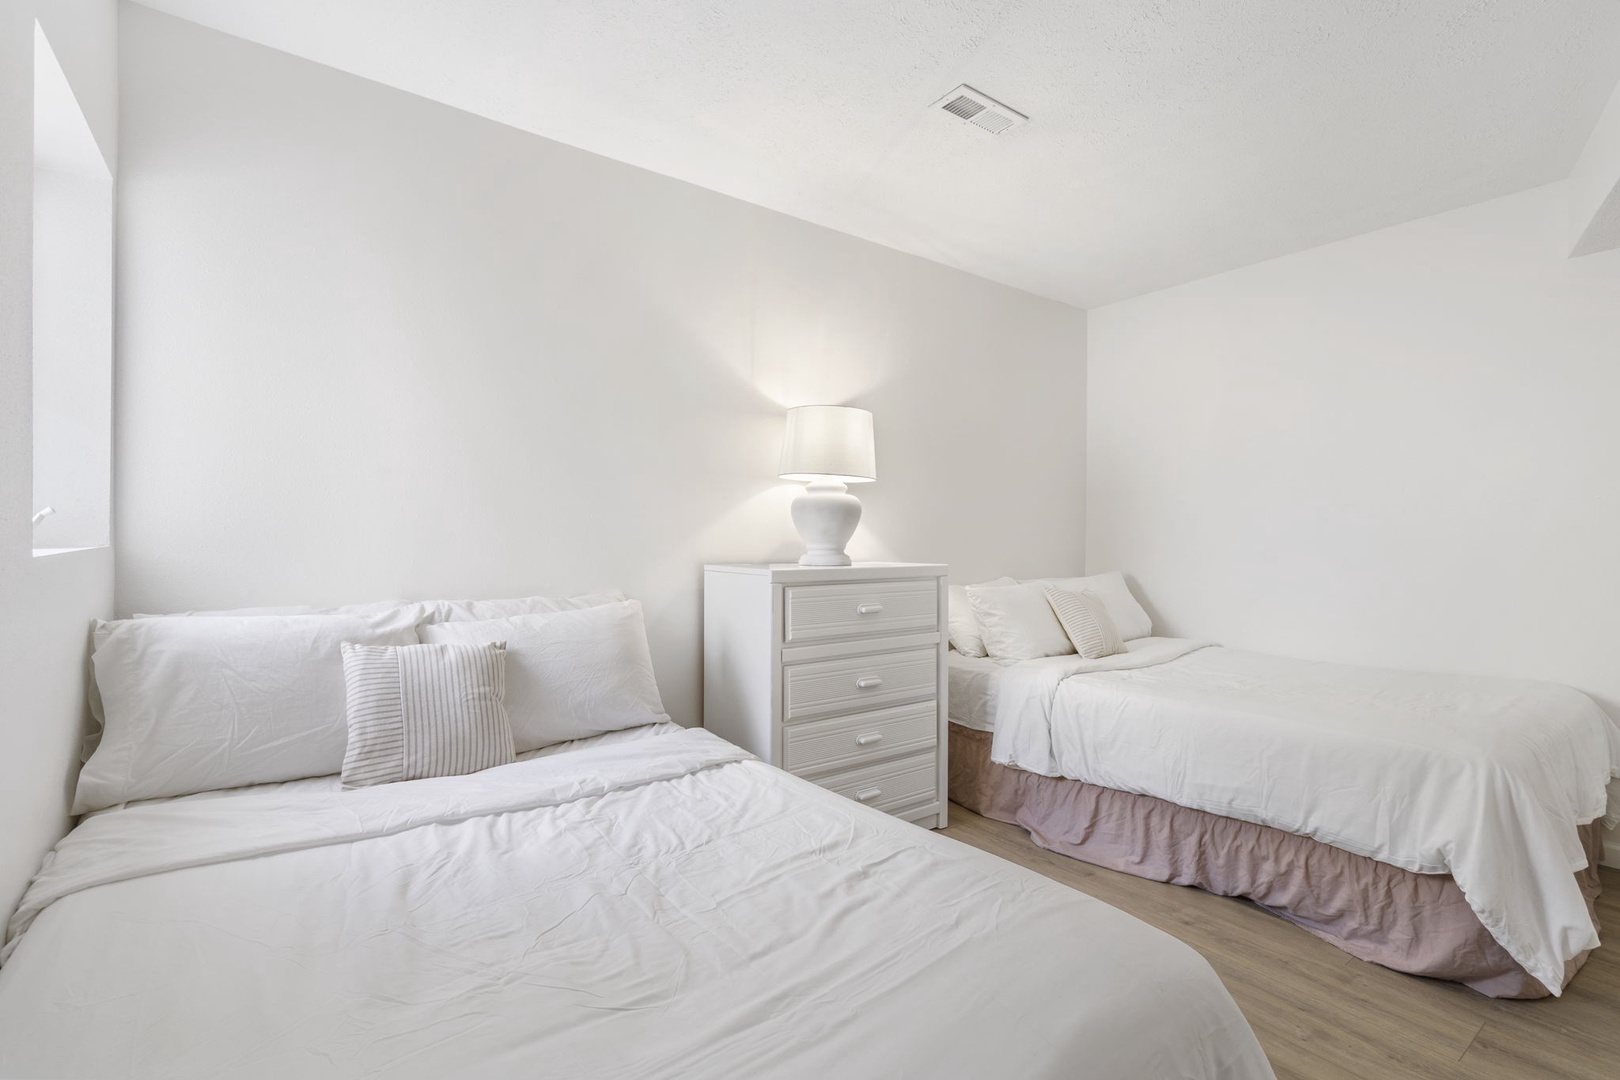 Unit 41: This 1st floor bedroom includes a pair of cozy full-sized beds